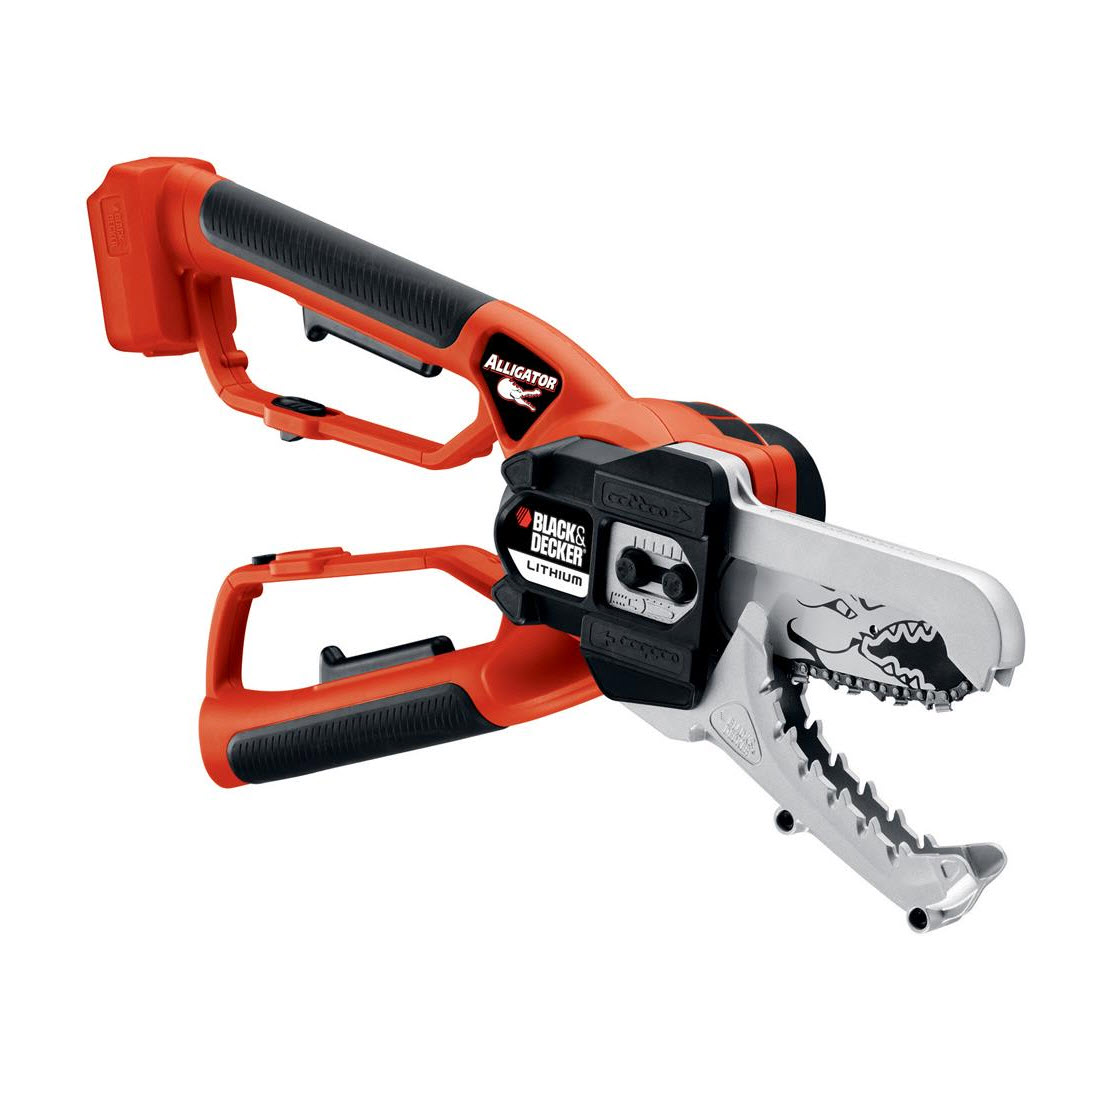 BLACK+DECKER LLP120B Black and Decker  20V Max Lithium Ion Alligator Lopper Saw (Battery & Charger not included)